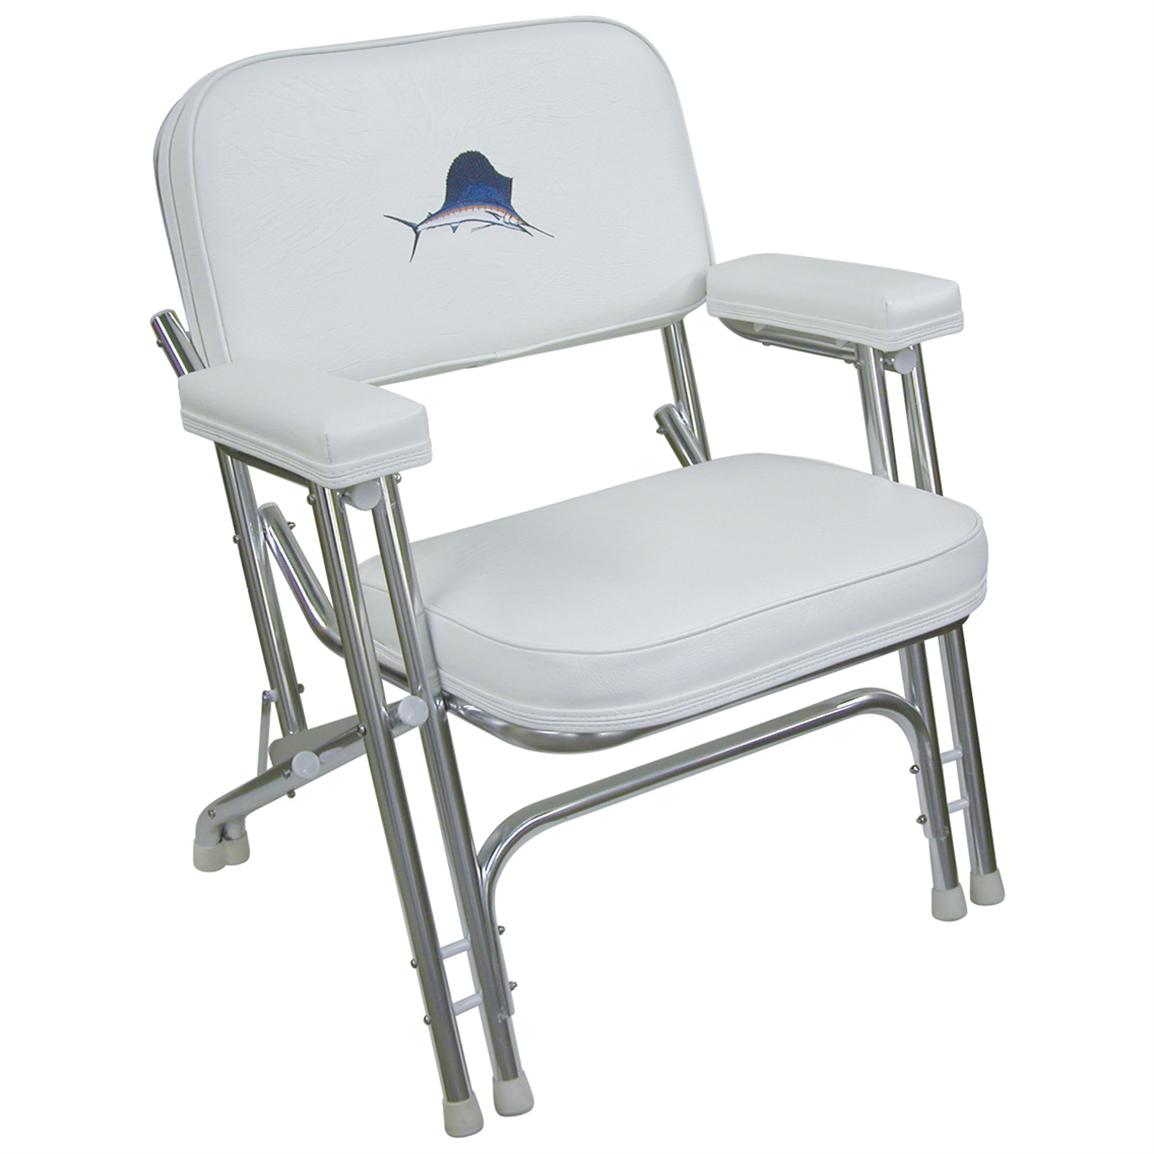 Wise® Offshore Folding Deck Chair - 141425, Fishing Chairs at Sportsman